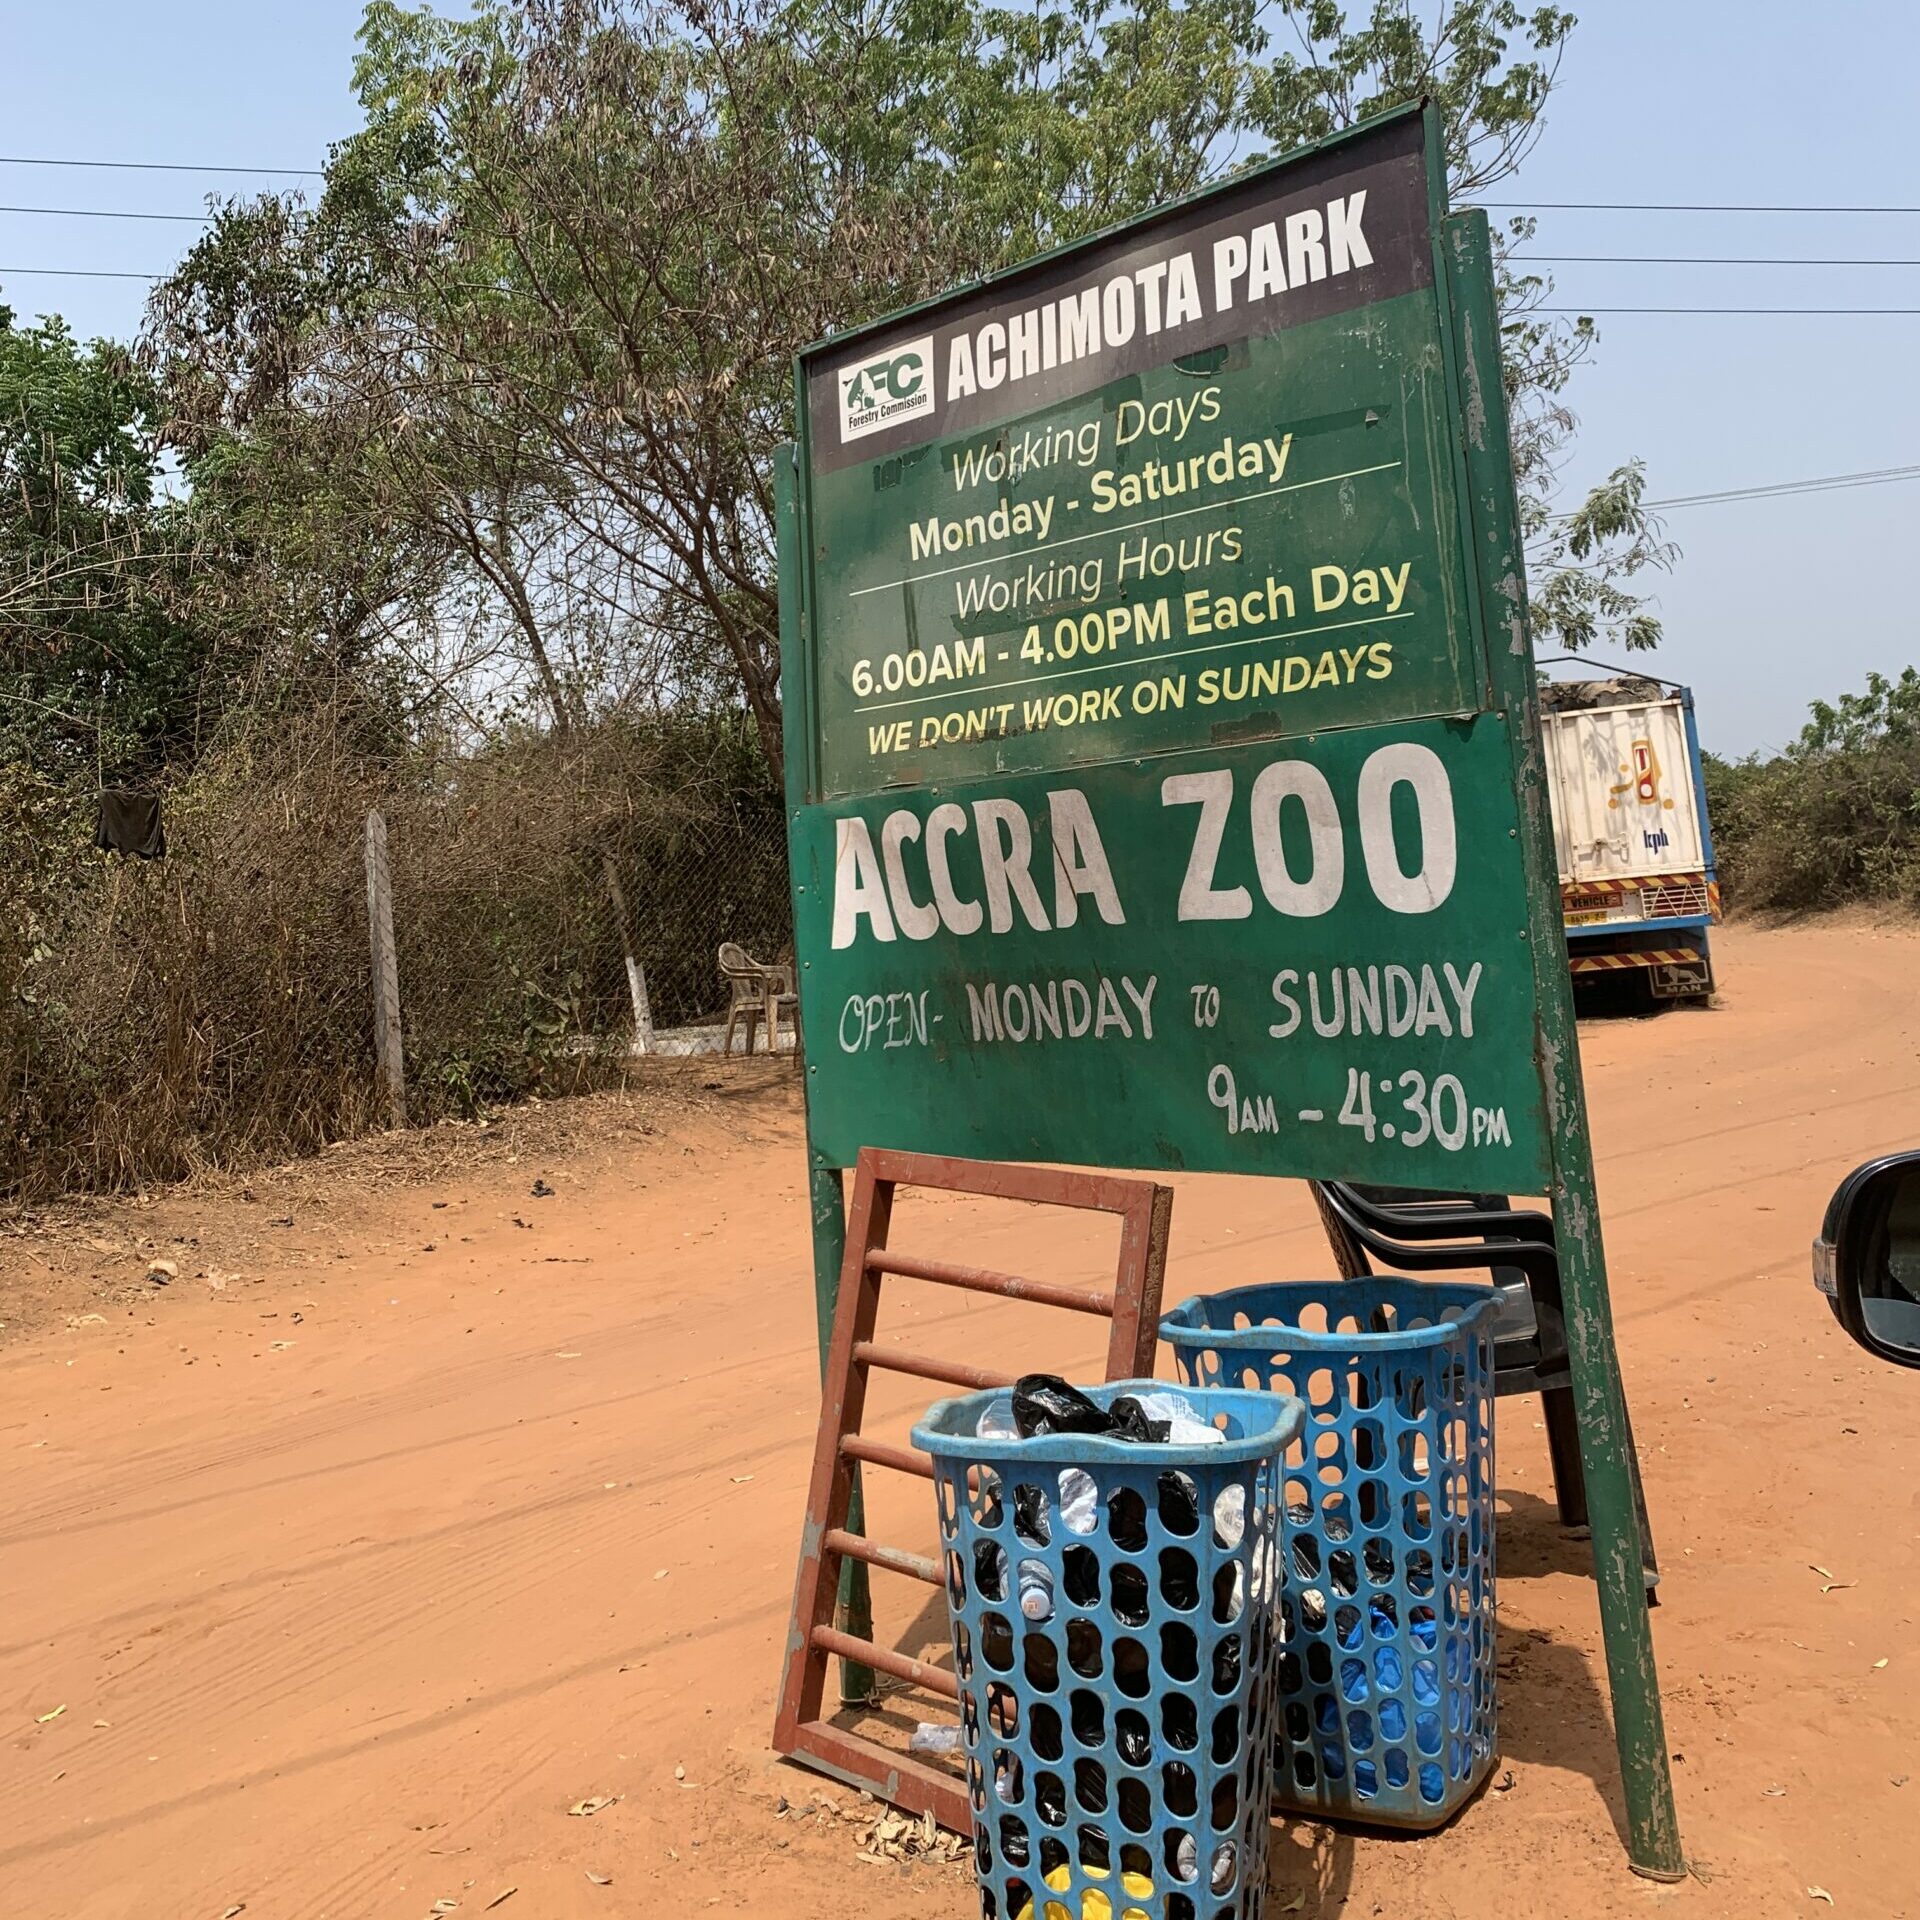 The welcoming sign at the entrance of the Accra Zoo that reads that it is open Mon - Sat from 6am-4pm. 